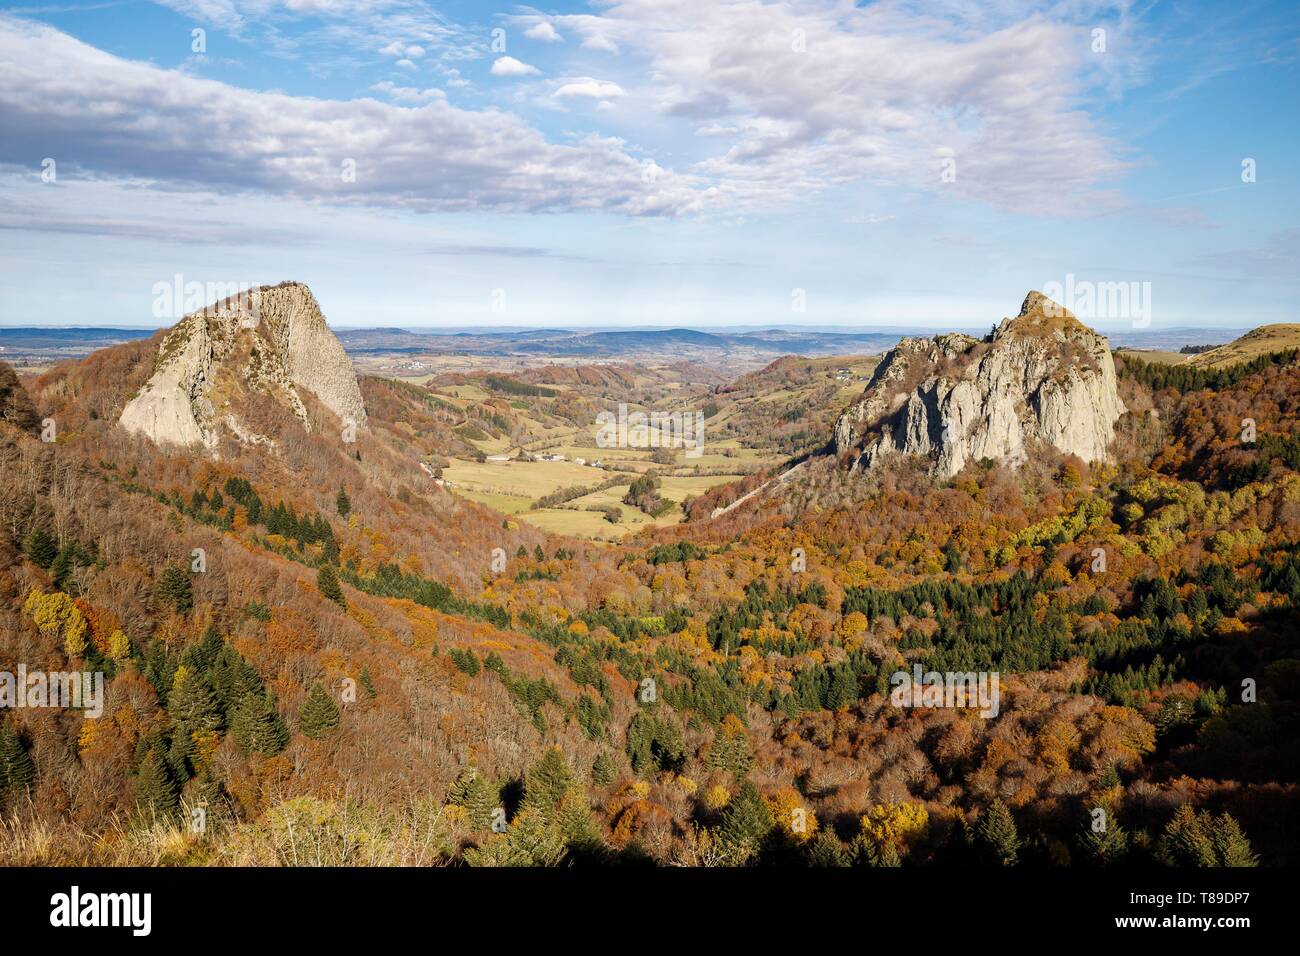 France, Puy de Dome, regional natural park of Auvergne volcanoes, Monts Dore, Col de Guéry, Roches Tuiliere (left) and Sanadoire (right), two volcanic protrusions Stock Photo